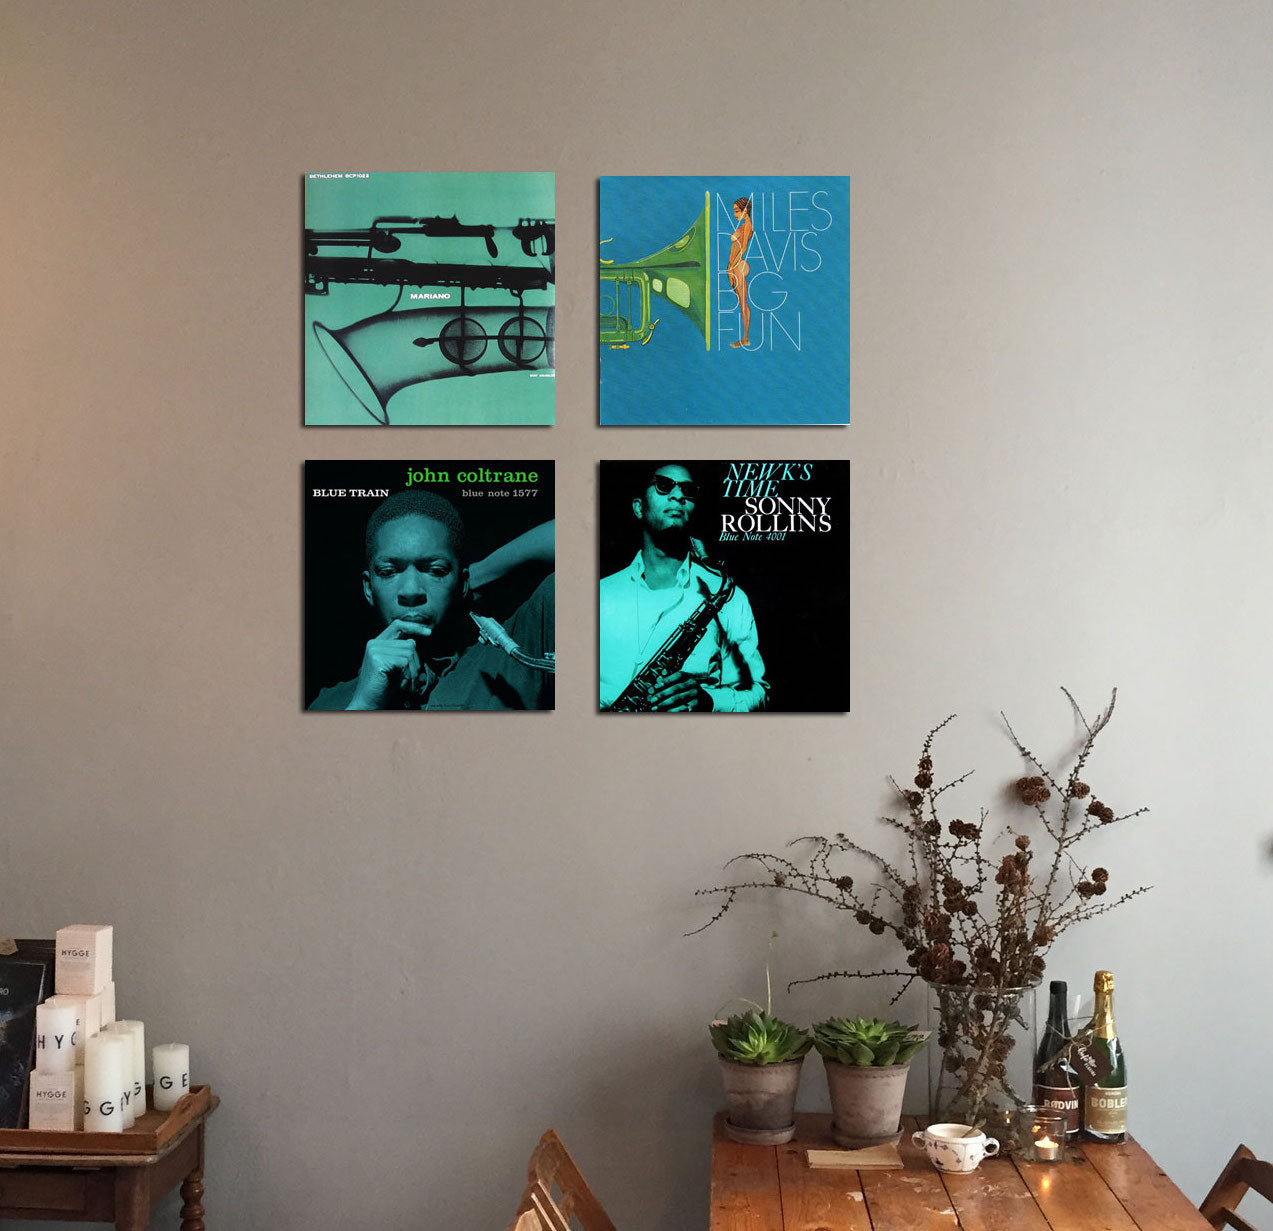 4 twelve inch on the wall in a cafe with jazz theme